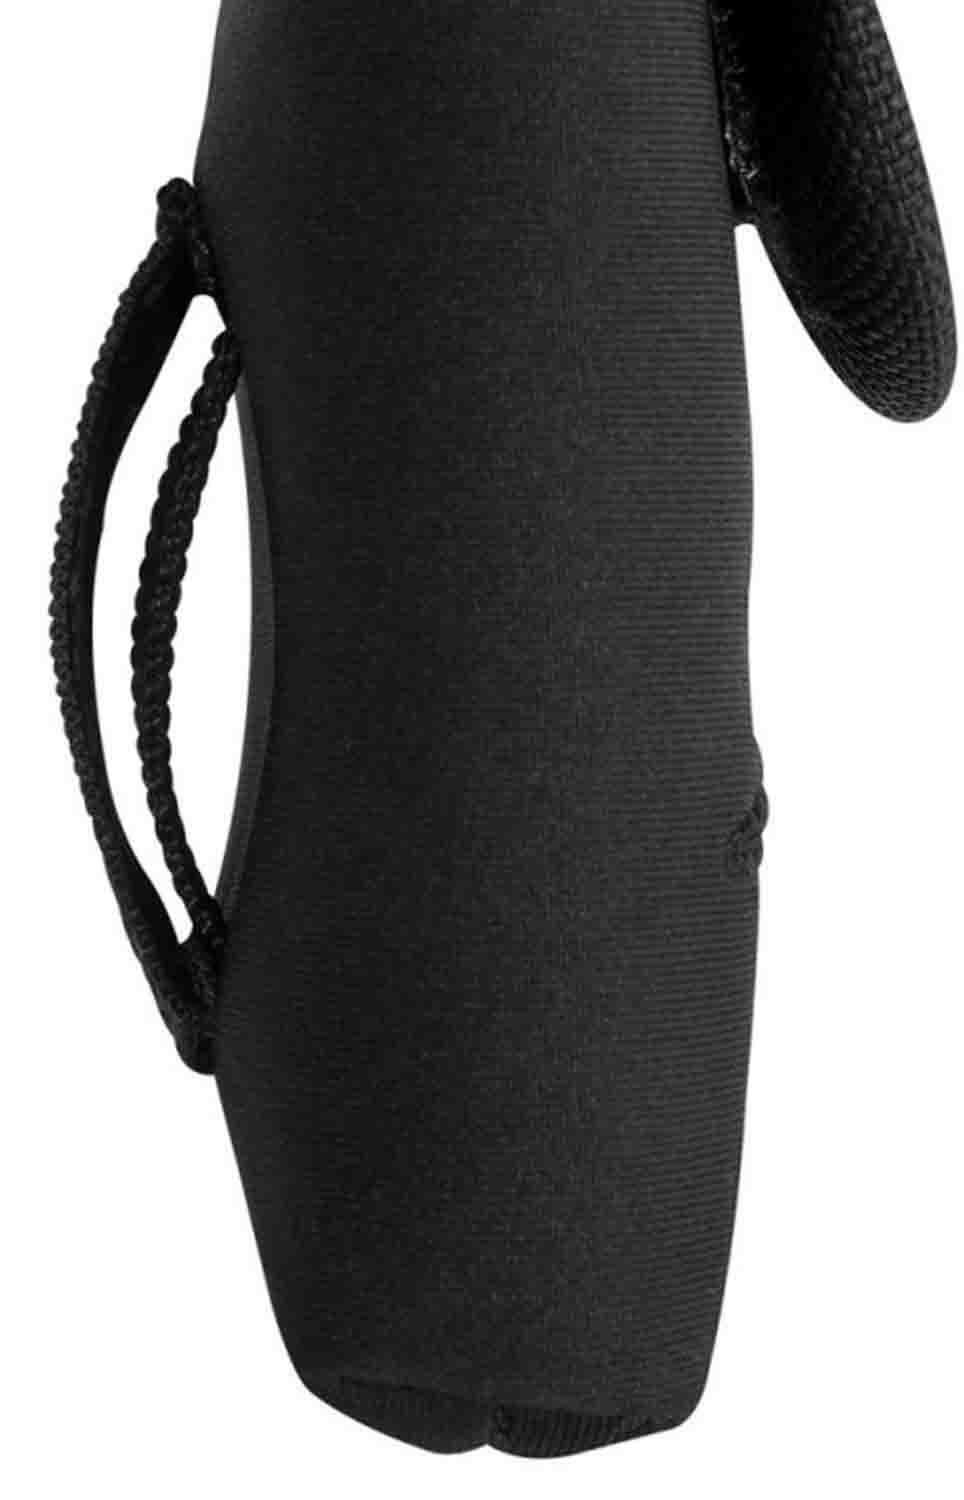 Onstage MA1335 Wireless Transmitter Pouch with Guitar Strap - Hollywood DJ